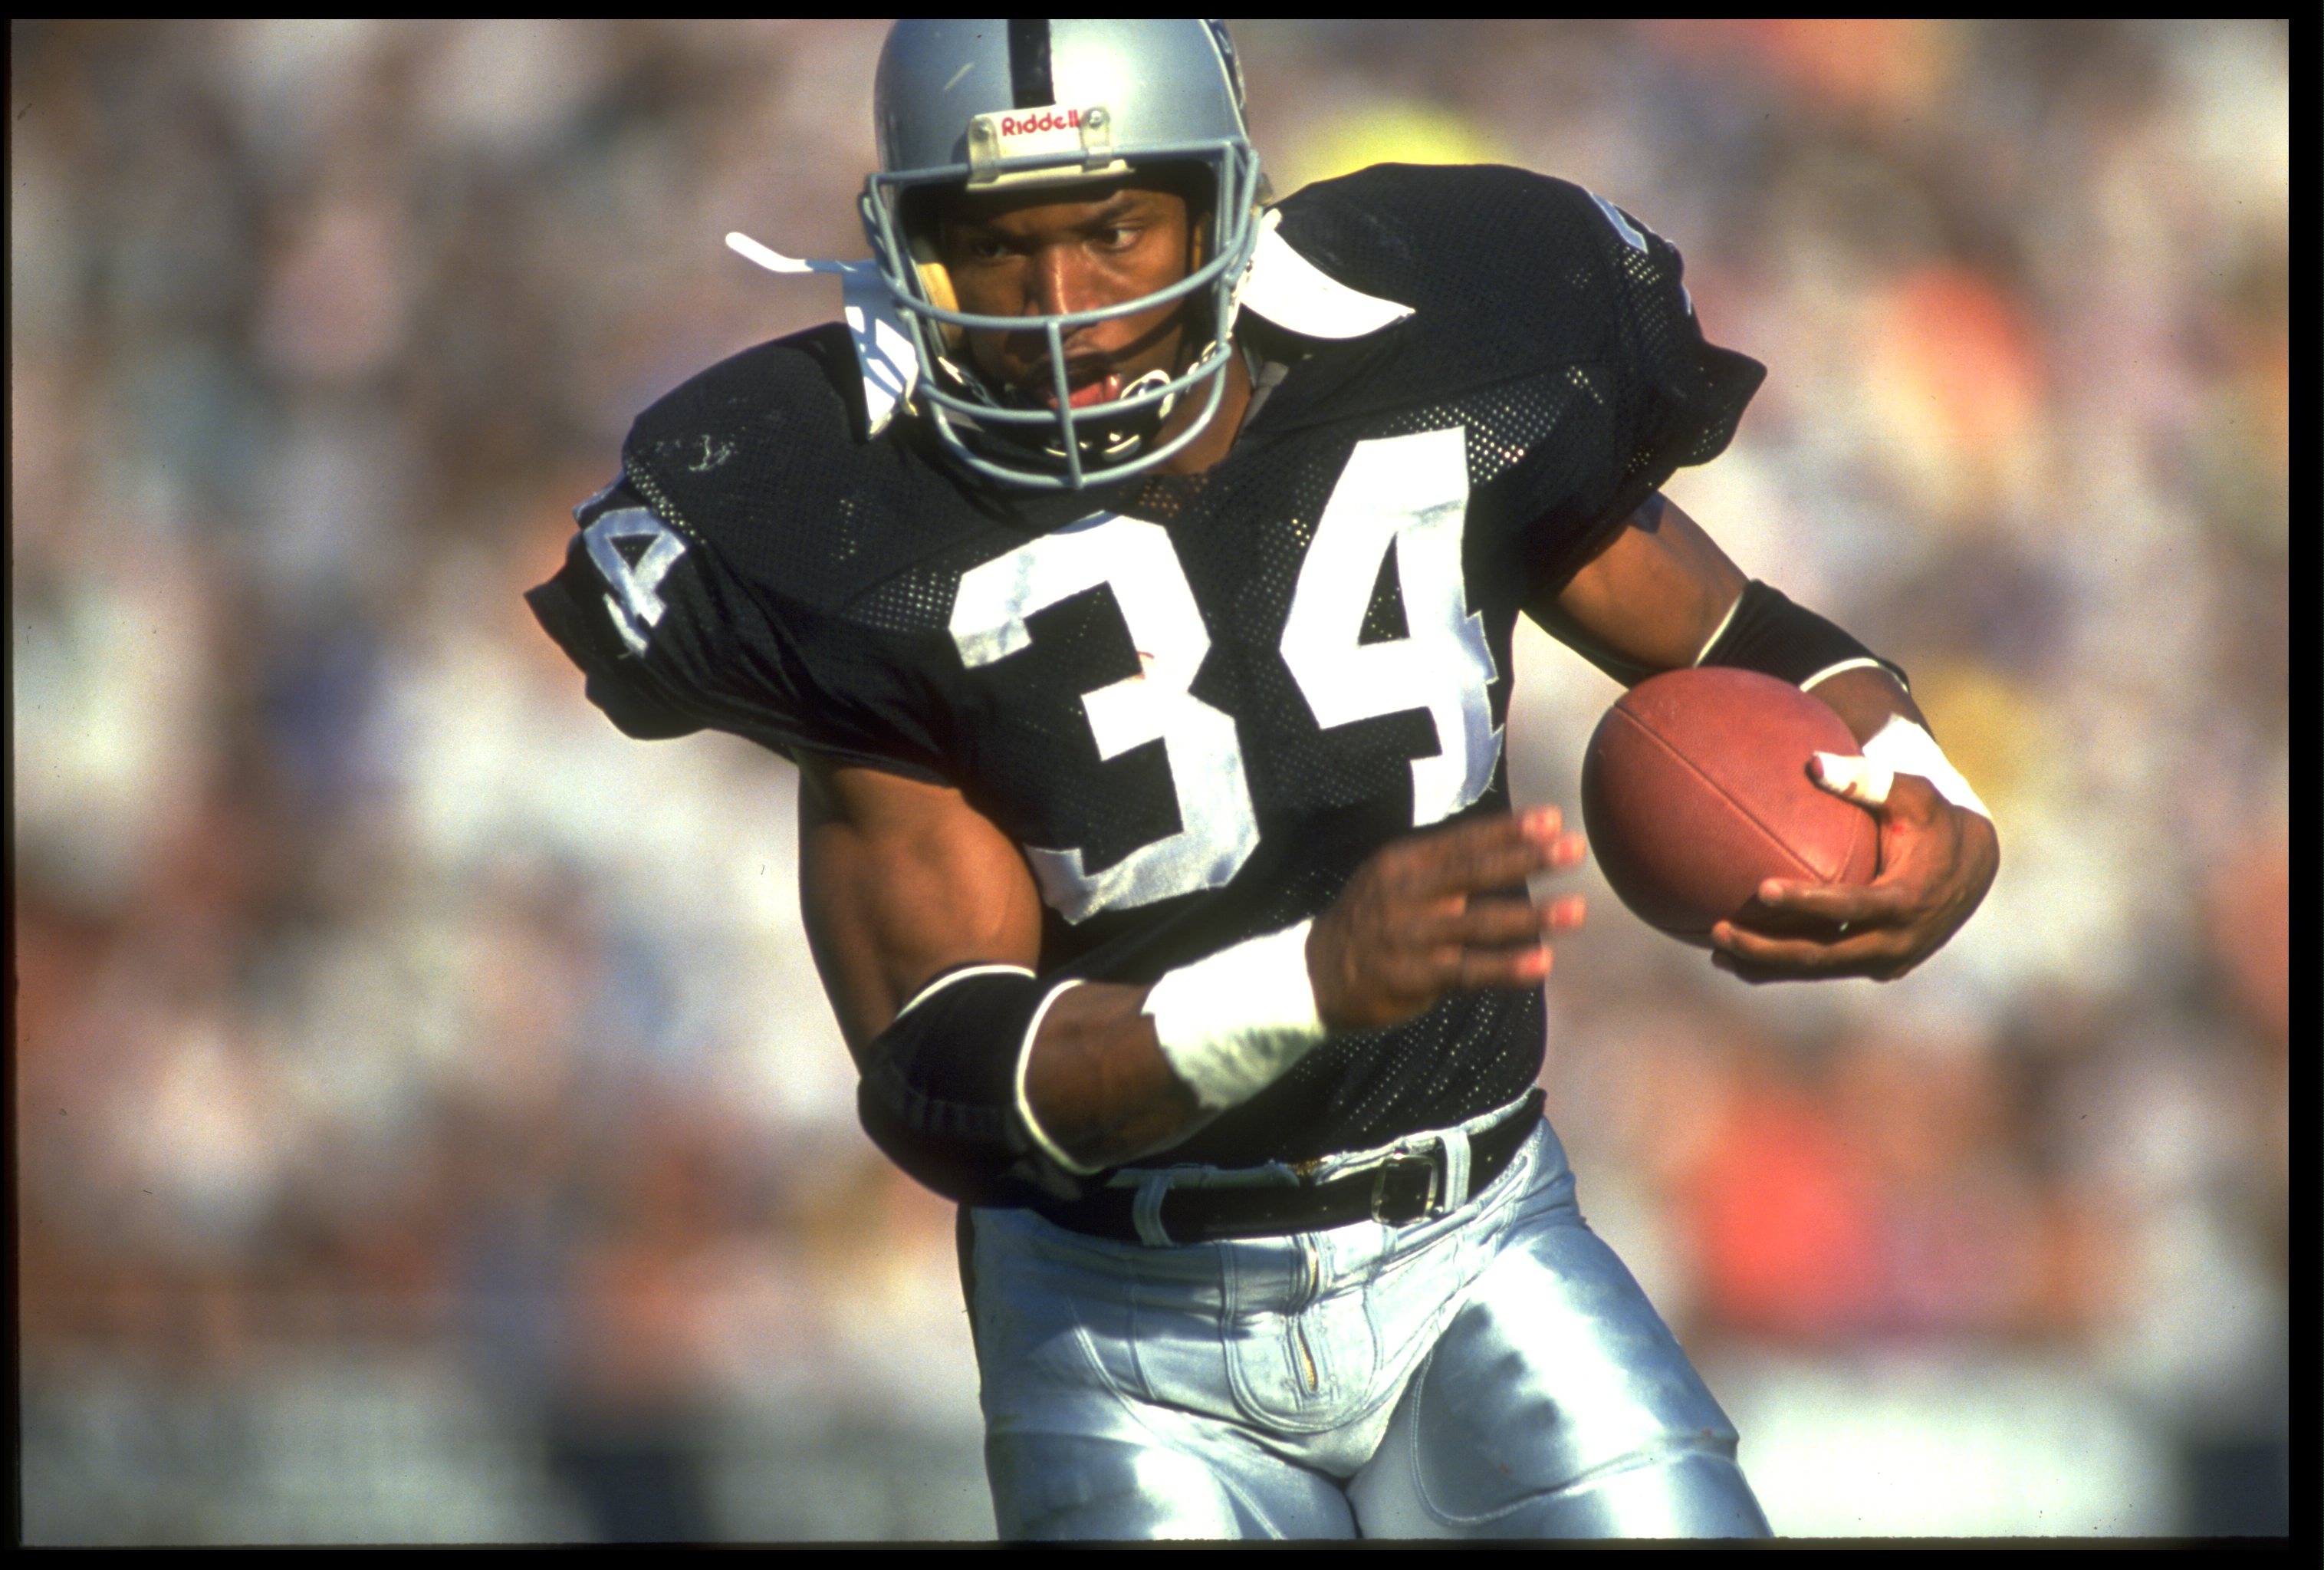 1990:  LOS ANGELES RAIDERS RUNNING BACK BO JACKSON CARRIES THE FOOTBALL DURING THE RAIDERS GAME AT THE MEMORIAL COLISEUM IN LOS ANGELES, CALIFORNIA.  MANDATORY CREDIT:  MIKE POWELL/ALLSPORT